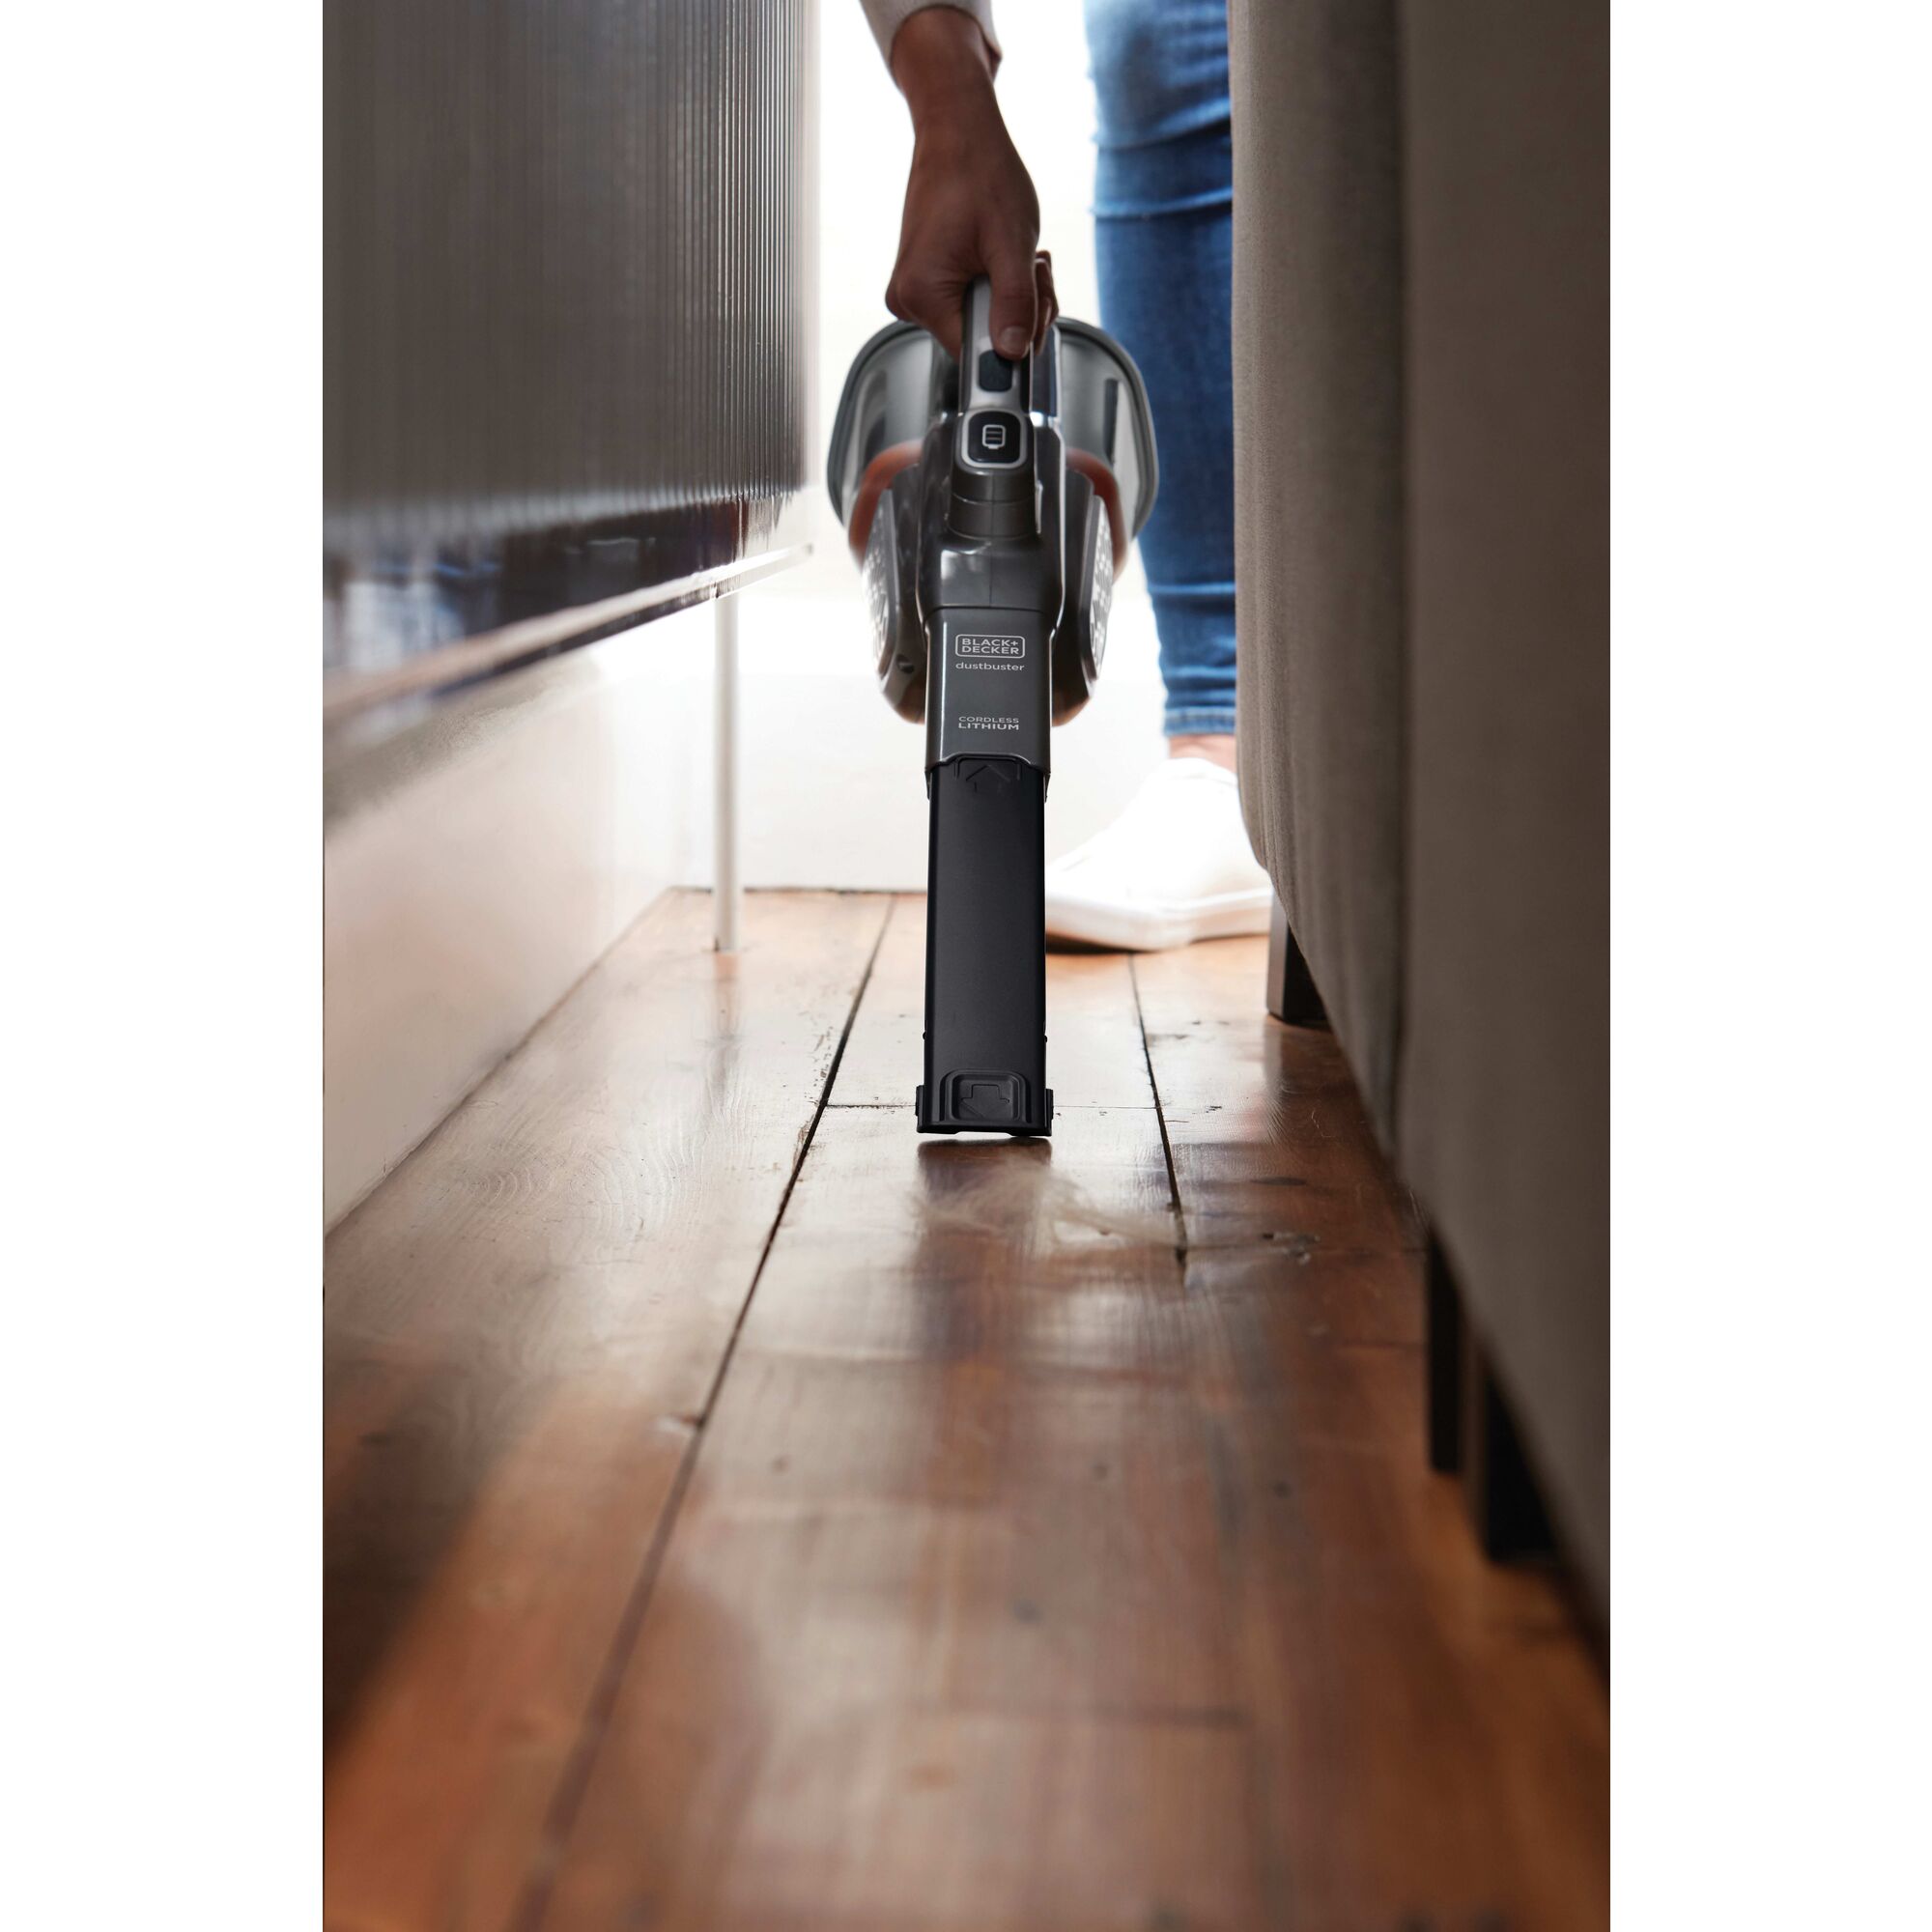 16 Volt MAX dustbuster Advanced Clean plus Hand Vacuum being used to clean narrow places behind sofa.